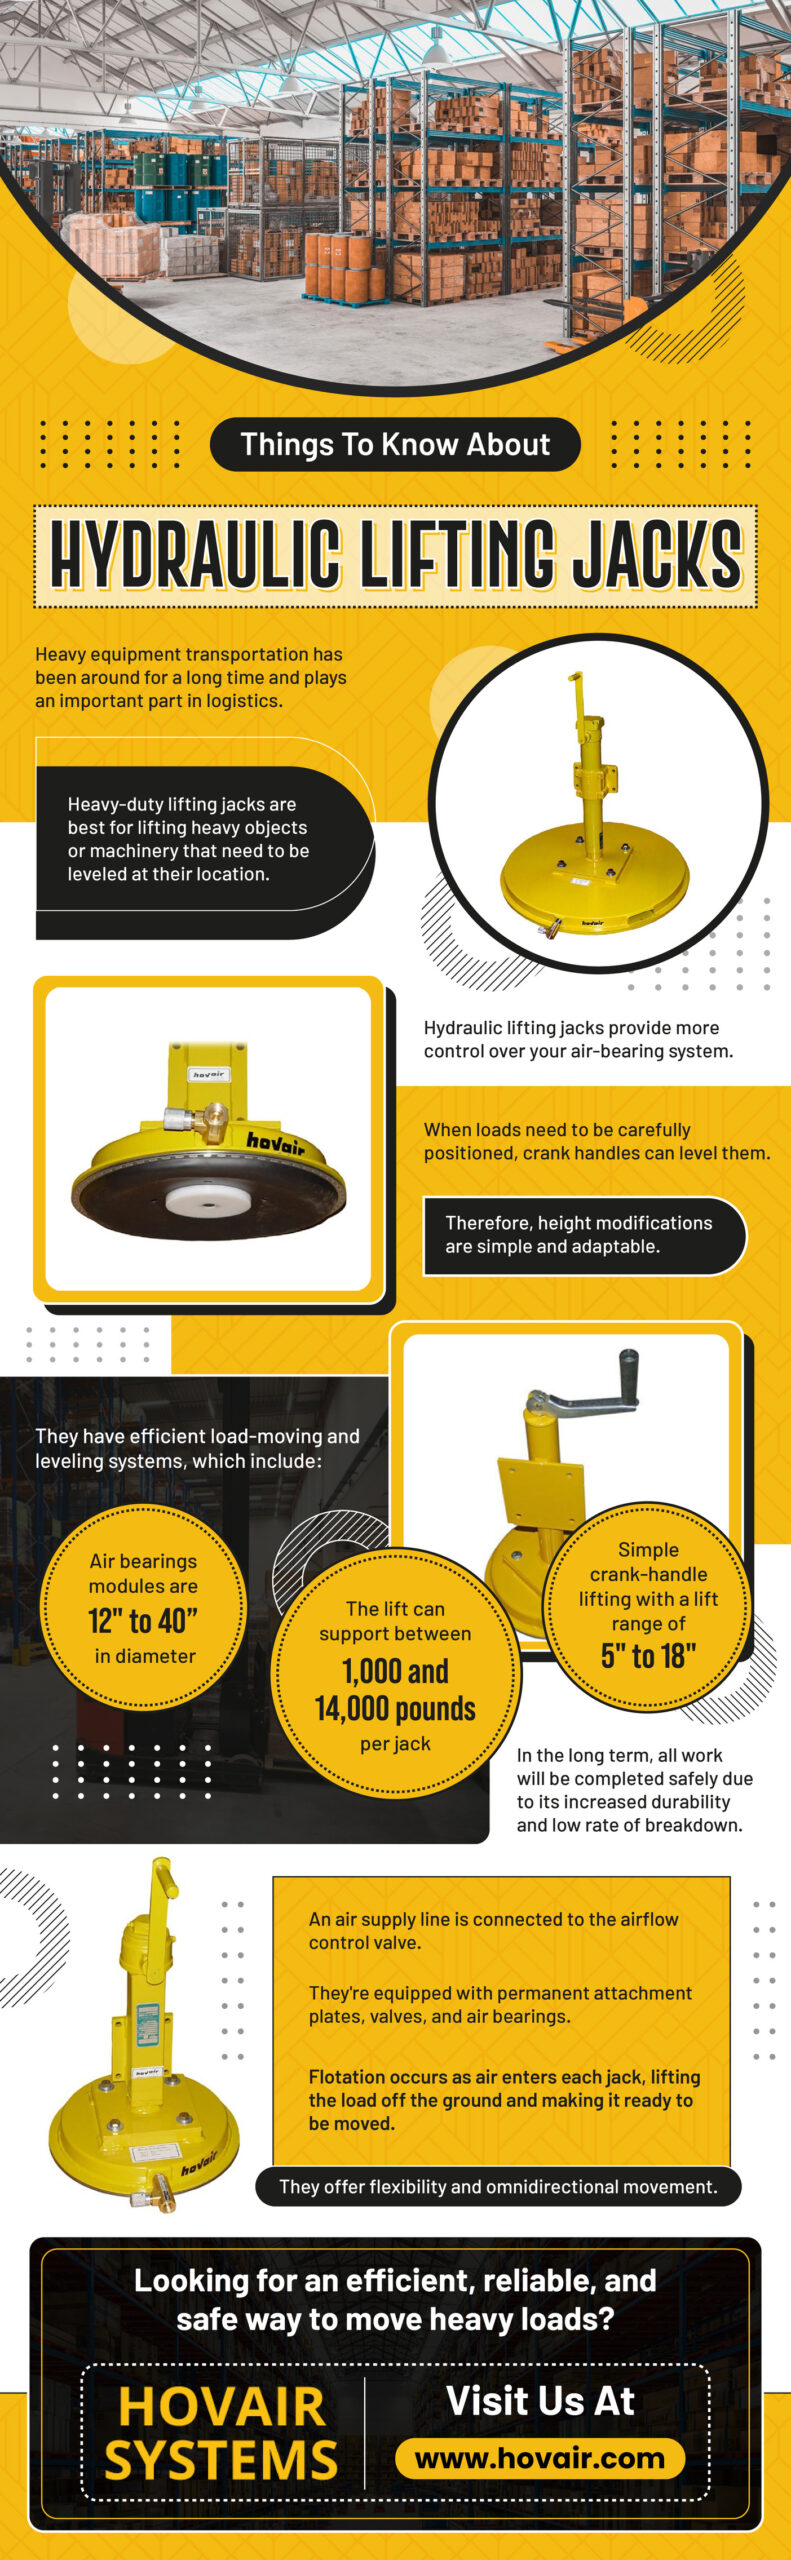 Things To Know About Hydraulic Lifting Jacks